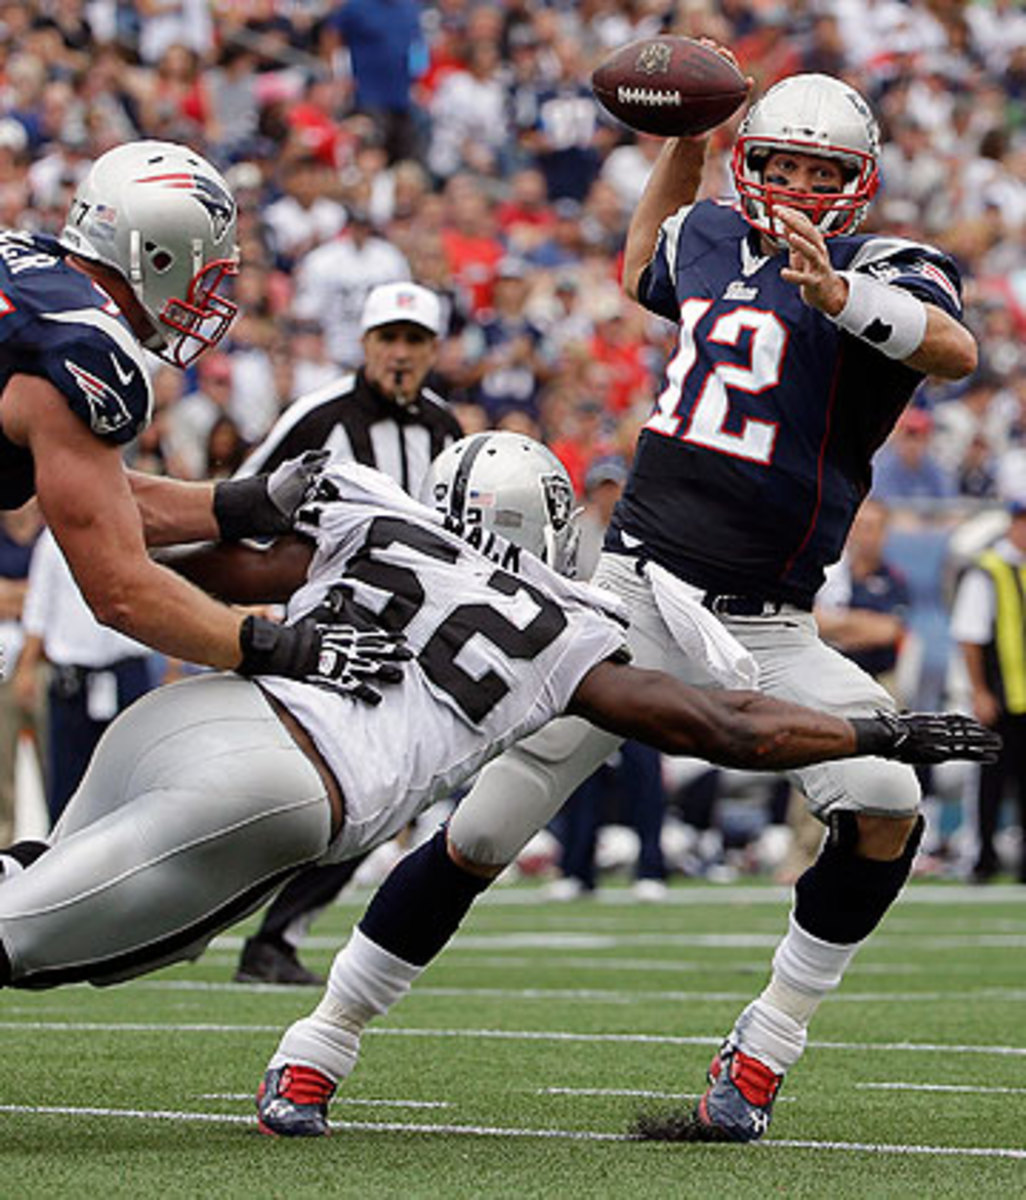 Tom Brady was sacked twice and hit on several more occasions by an active Raiders front. (Steven Senne/AP)